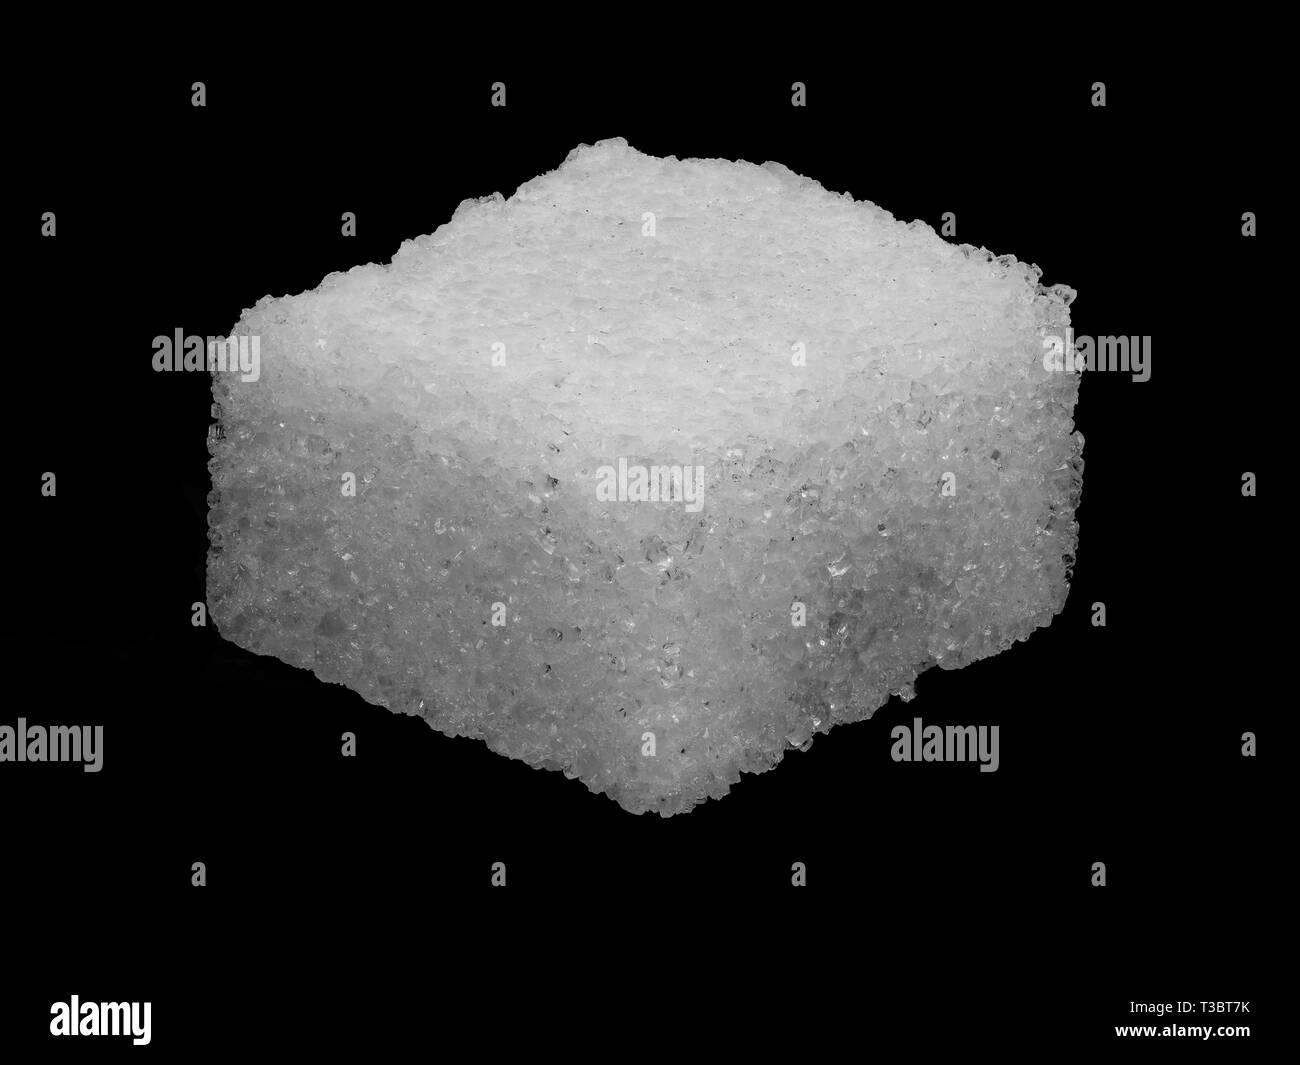 Macro image of a sugar cube isolated on a black background Stock Photo